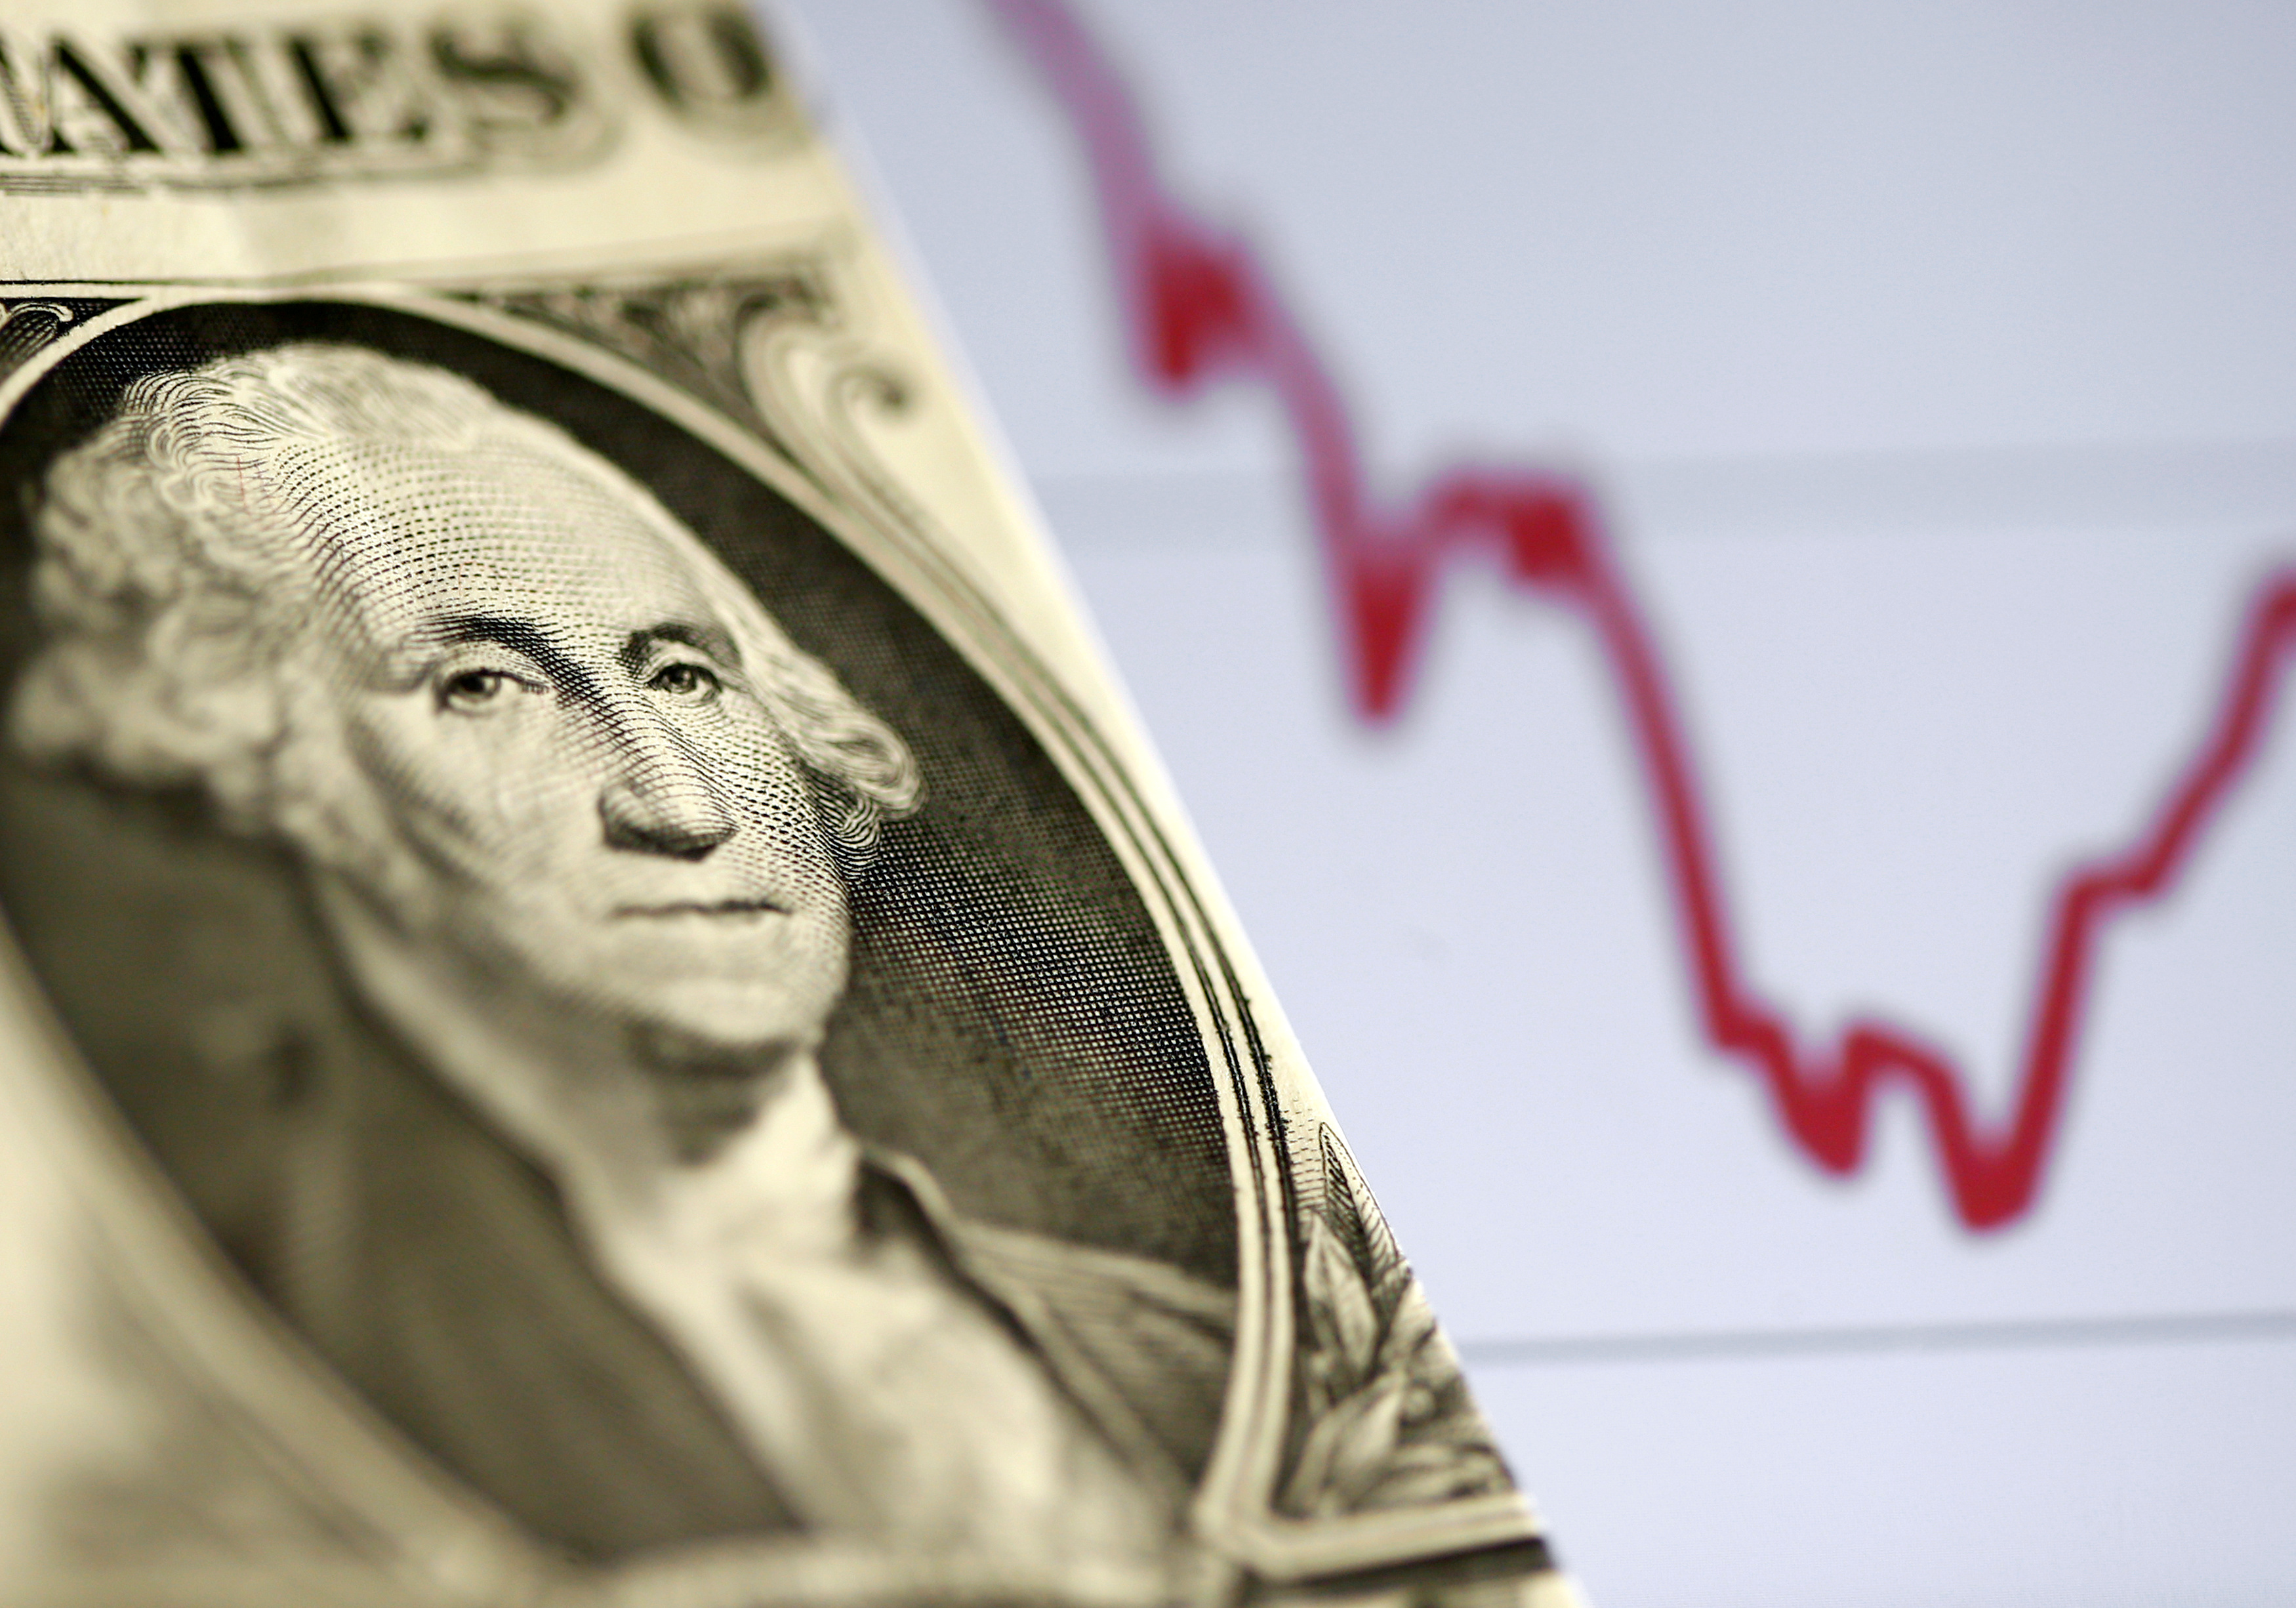 FILE PHOTO: A U.S. dollar note is seen in front of a stock graph in this picture illustration